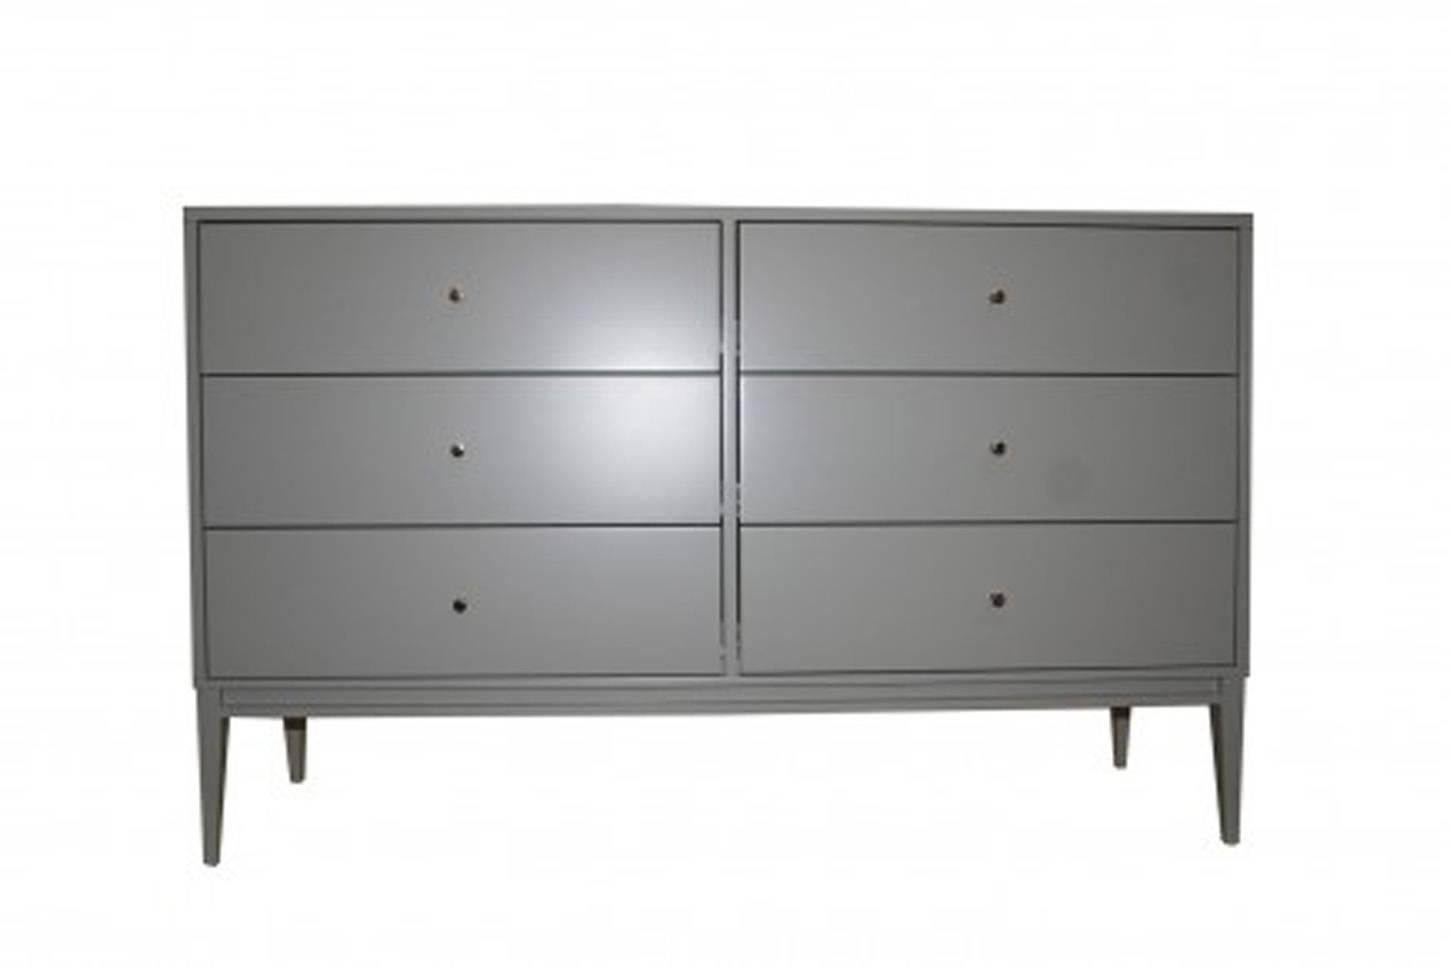 Six-drawer lacquered dresser on tapered legs. Solid brass pulls, grey satin lacquer finish, solid maple construction.

Custom orders have a lead time of 10-12 weeks FOB NYC. Lead time contingent upon selection of finishes, approval of shop